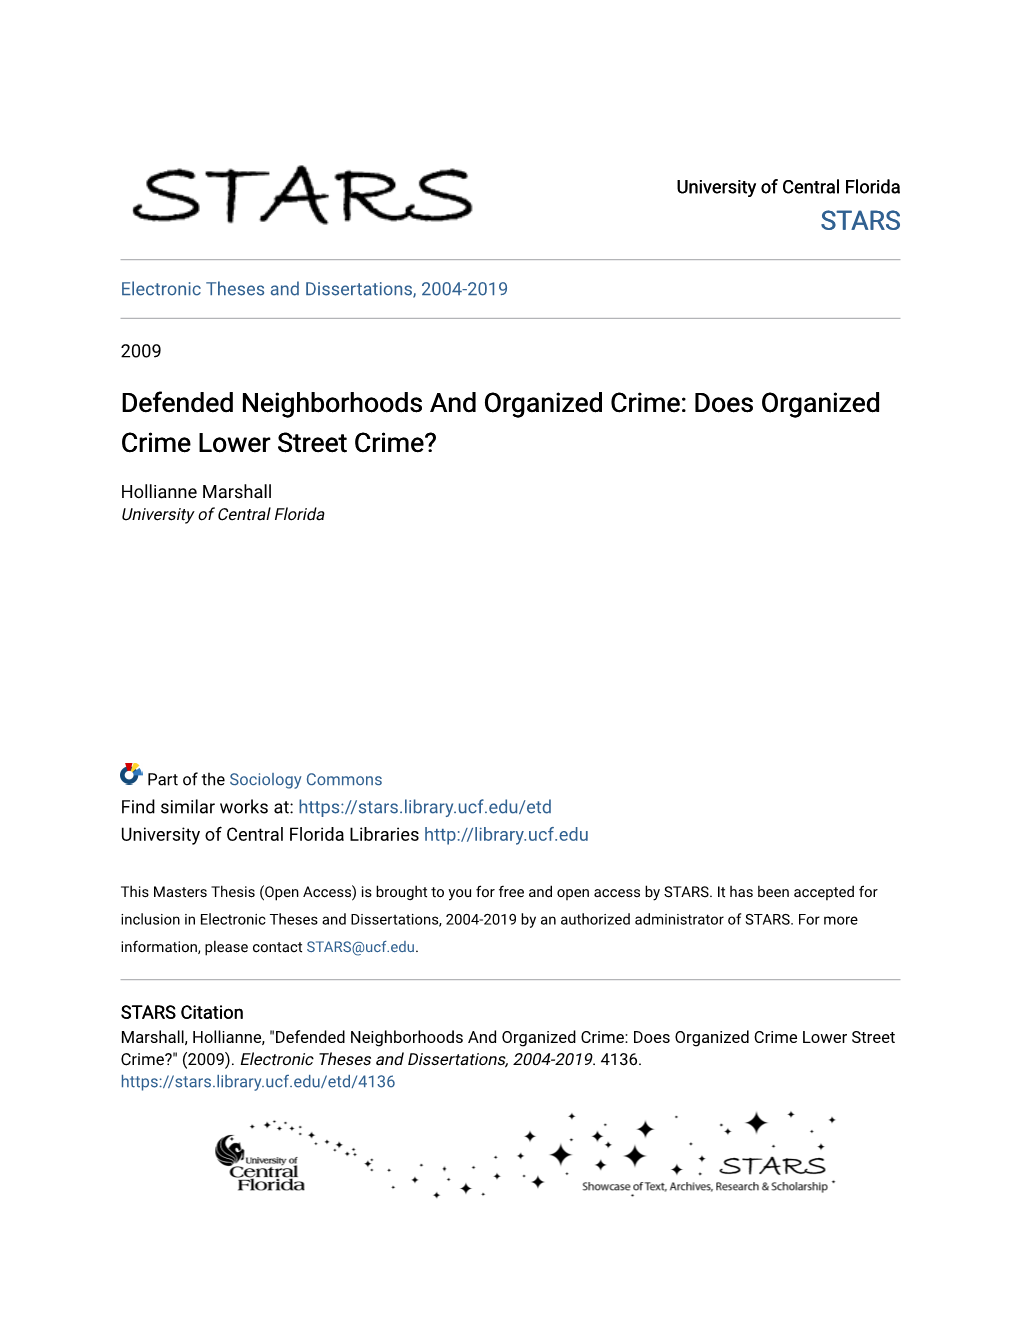 Defended Neighborhoods and Organized Crime: Does Organized Crime Lower Street Crime?